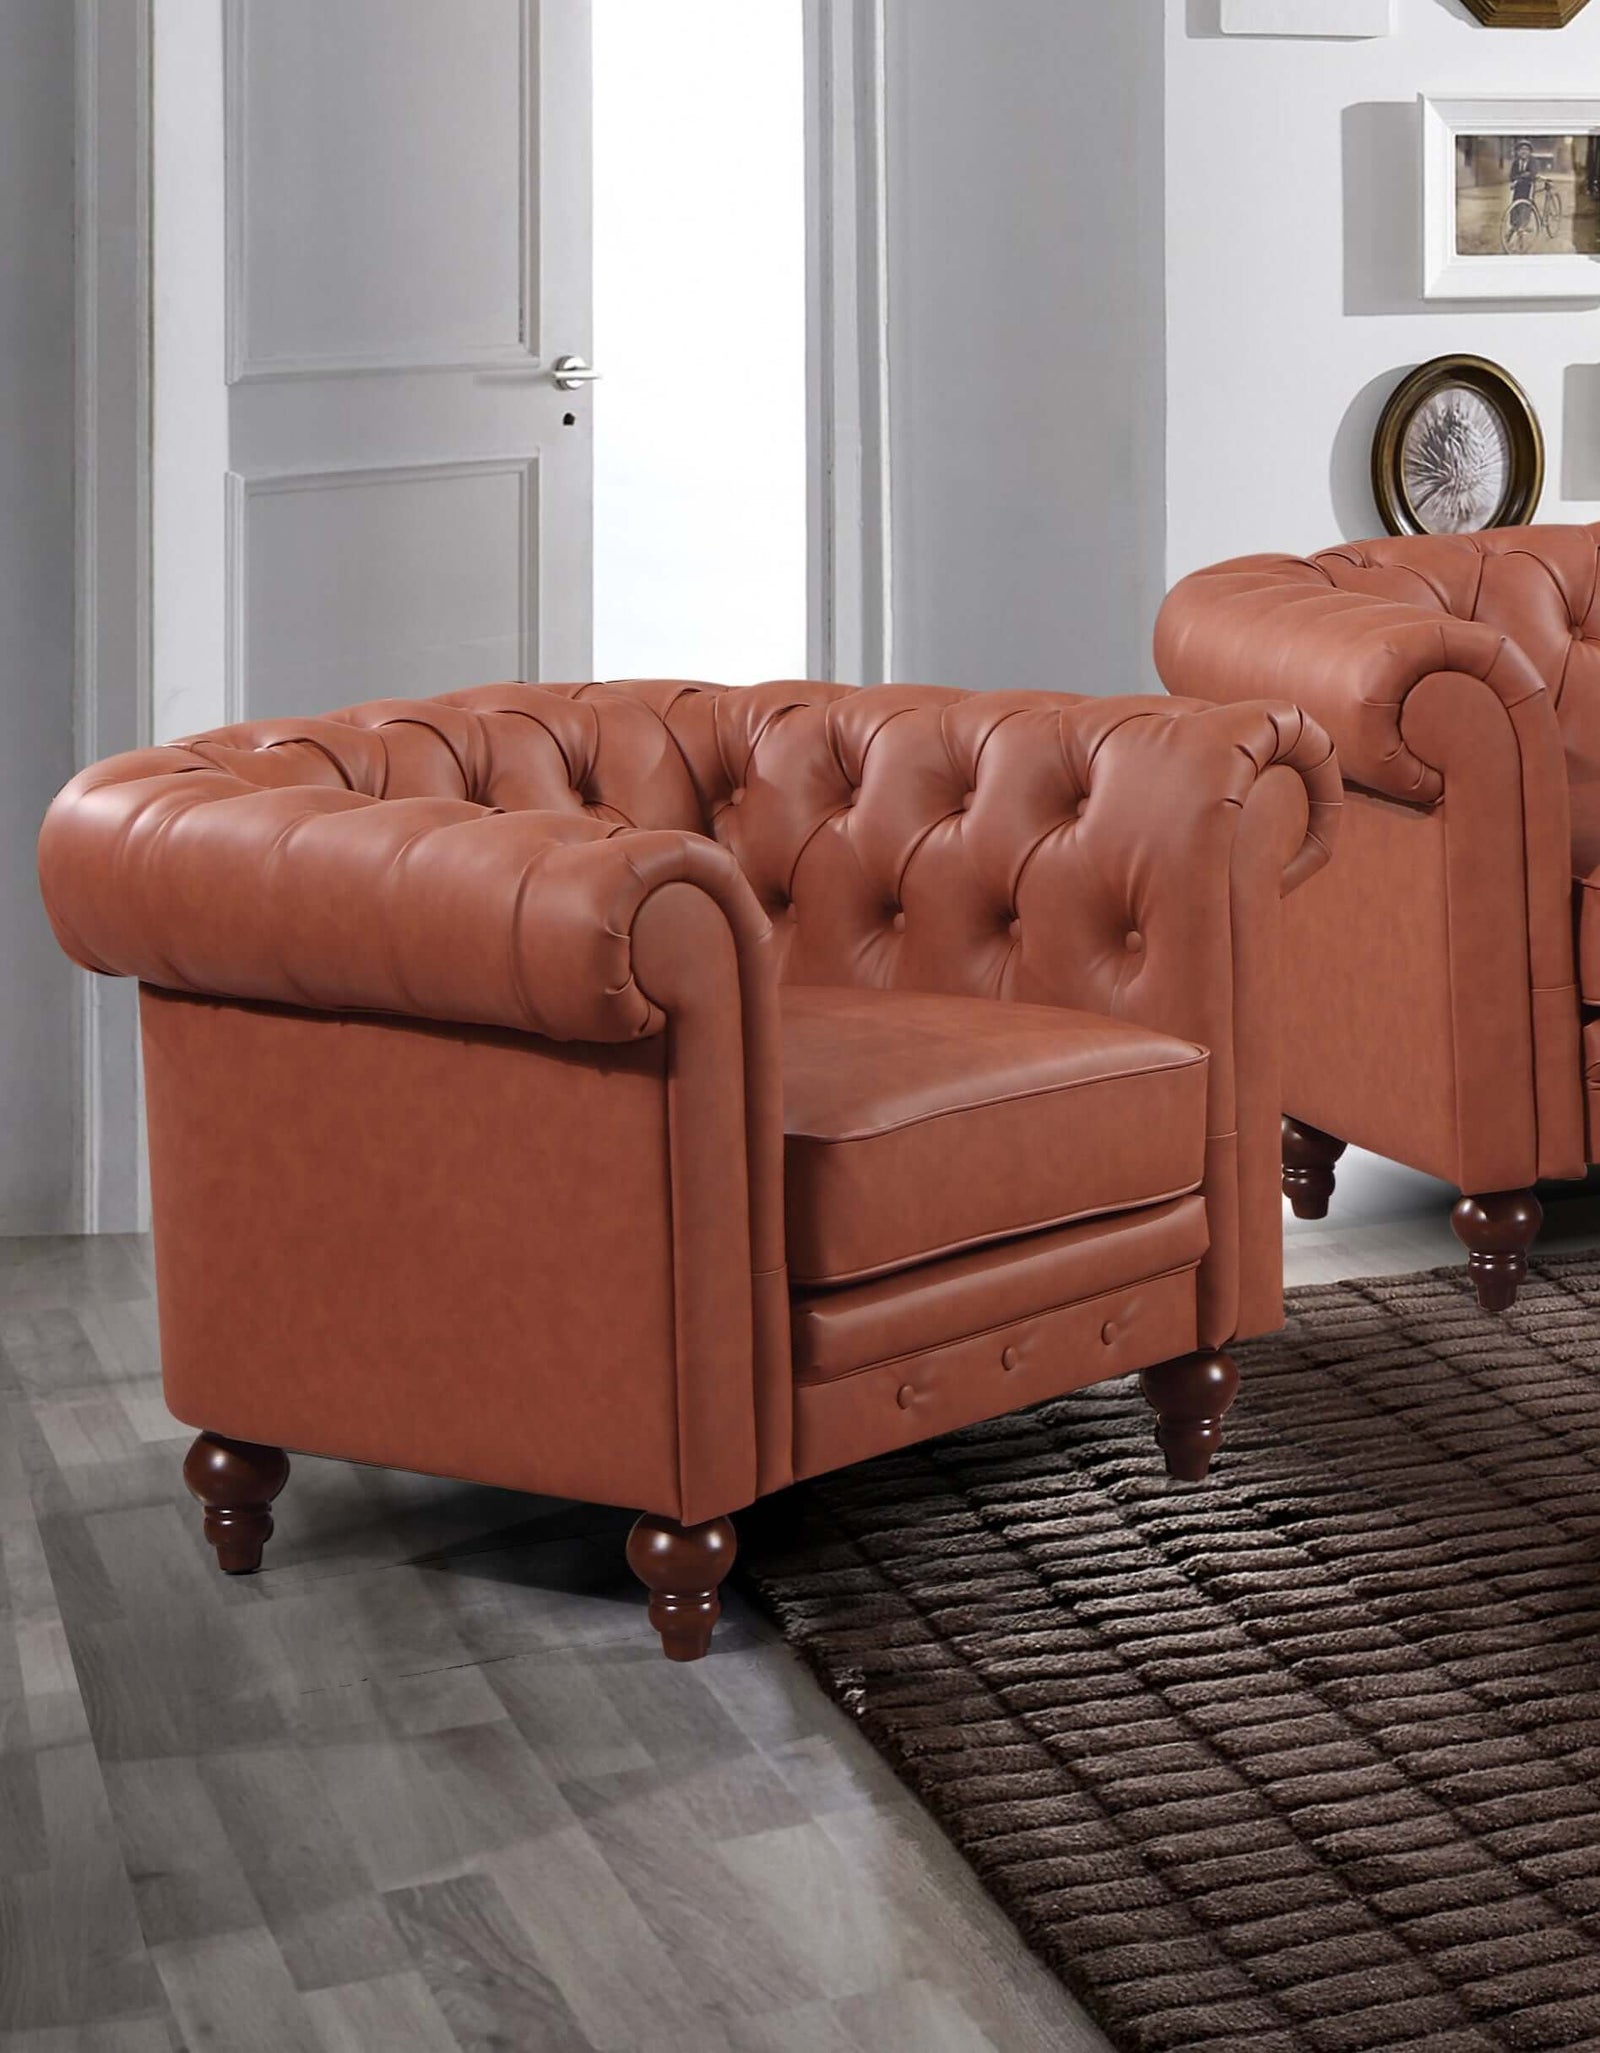 Single Seater Brown Sofa Armchair for Lounge Chesterfireld Style Button Tufted in Faux Leather-Upinteriors